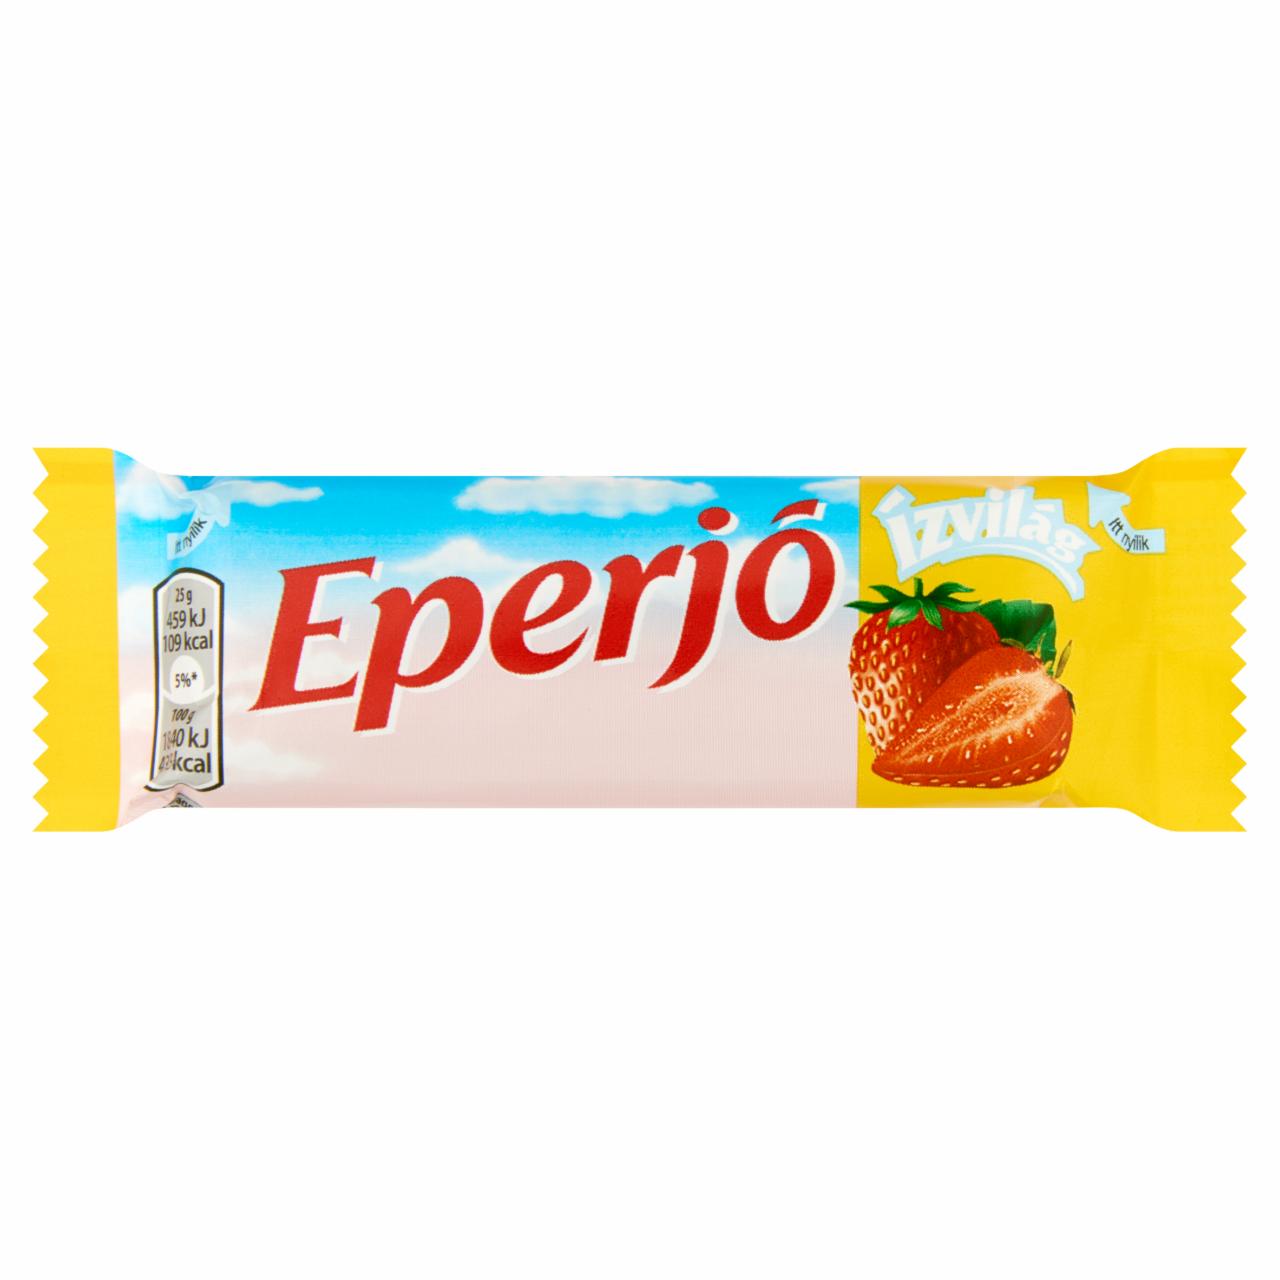 Photo - Ízvilág Eperjó Milk Chocolate Coated Bar with Strawberry Filling and Yoghurt Flavoured Filling 25 g